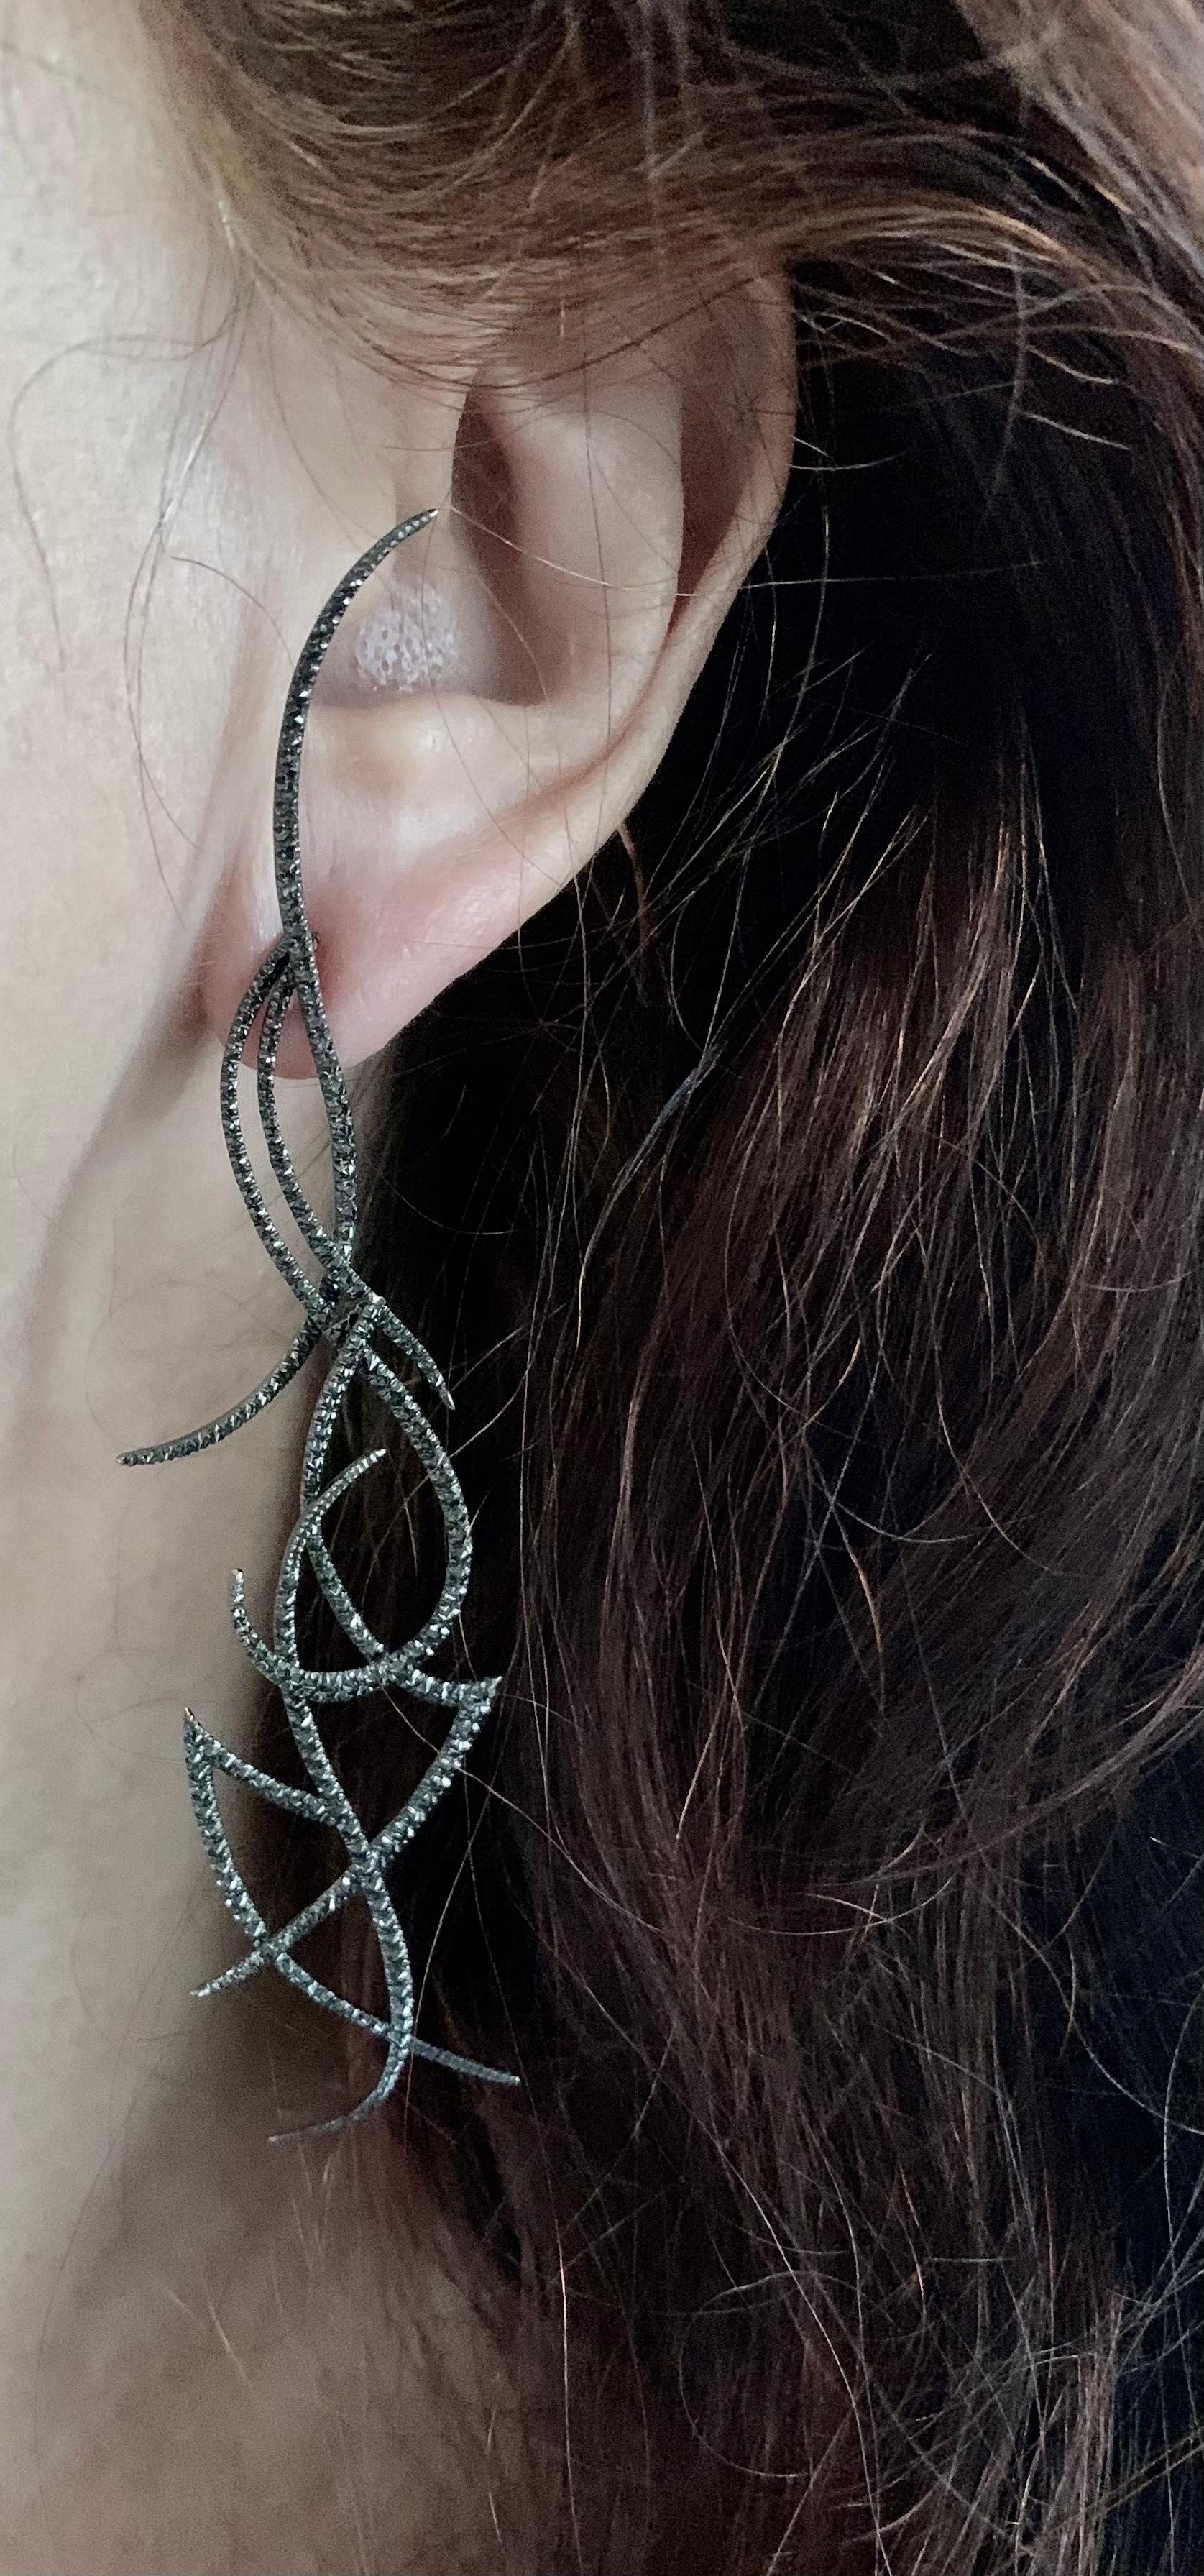 Stunning and dramatic 5.75 inch long articulated full cut black diamond earrings. The diamonds totaling approximately 3.3 carats are reverse set with the cullet pointing forward. 
Designed as a series of fine interconnected scrolls and linear artful